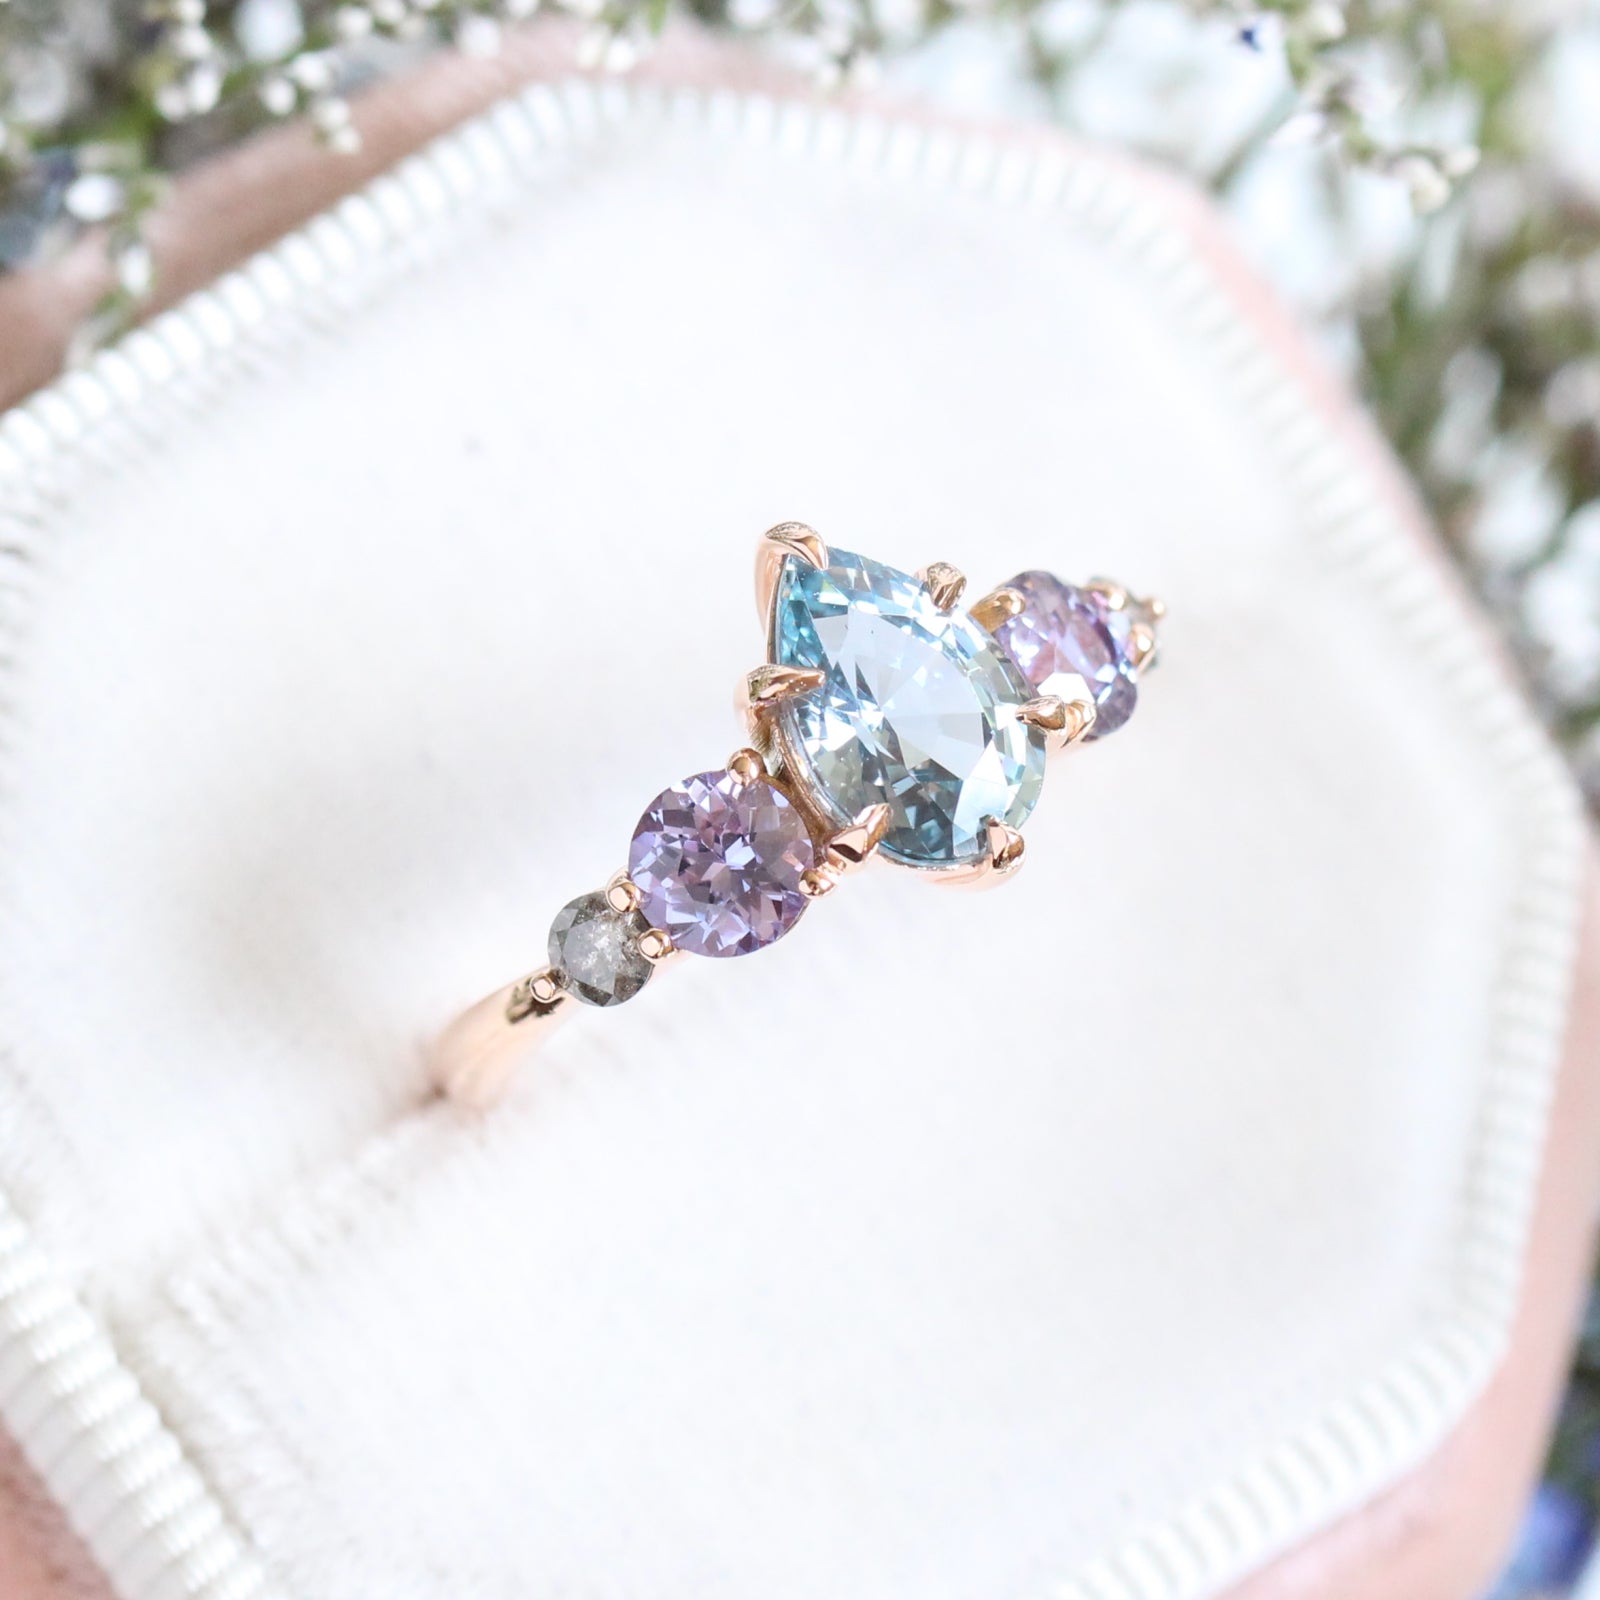 Pear Aqua Blue Sapphire Engagement Ring in Rose Gold 5 Stone Diamond Ring by La More Design Jewelry